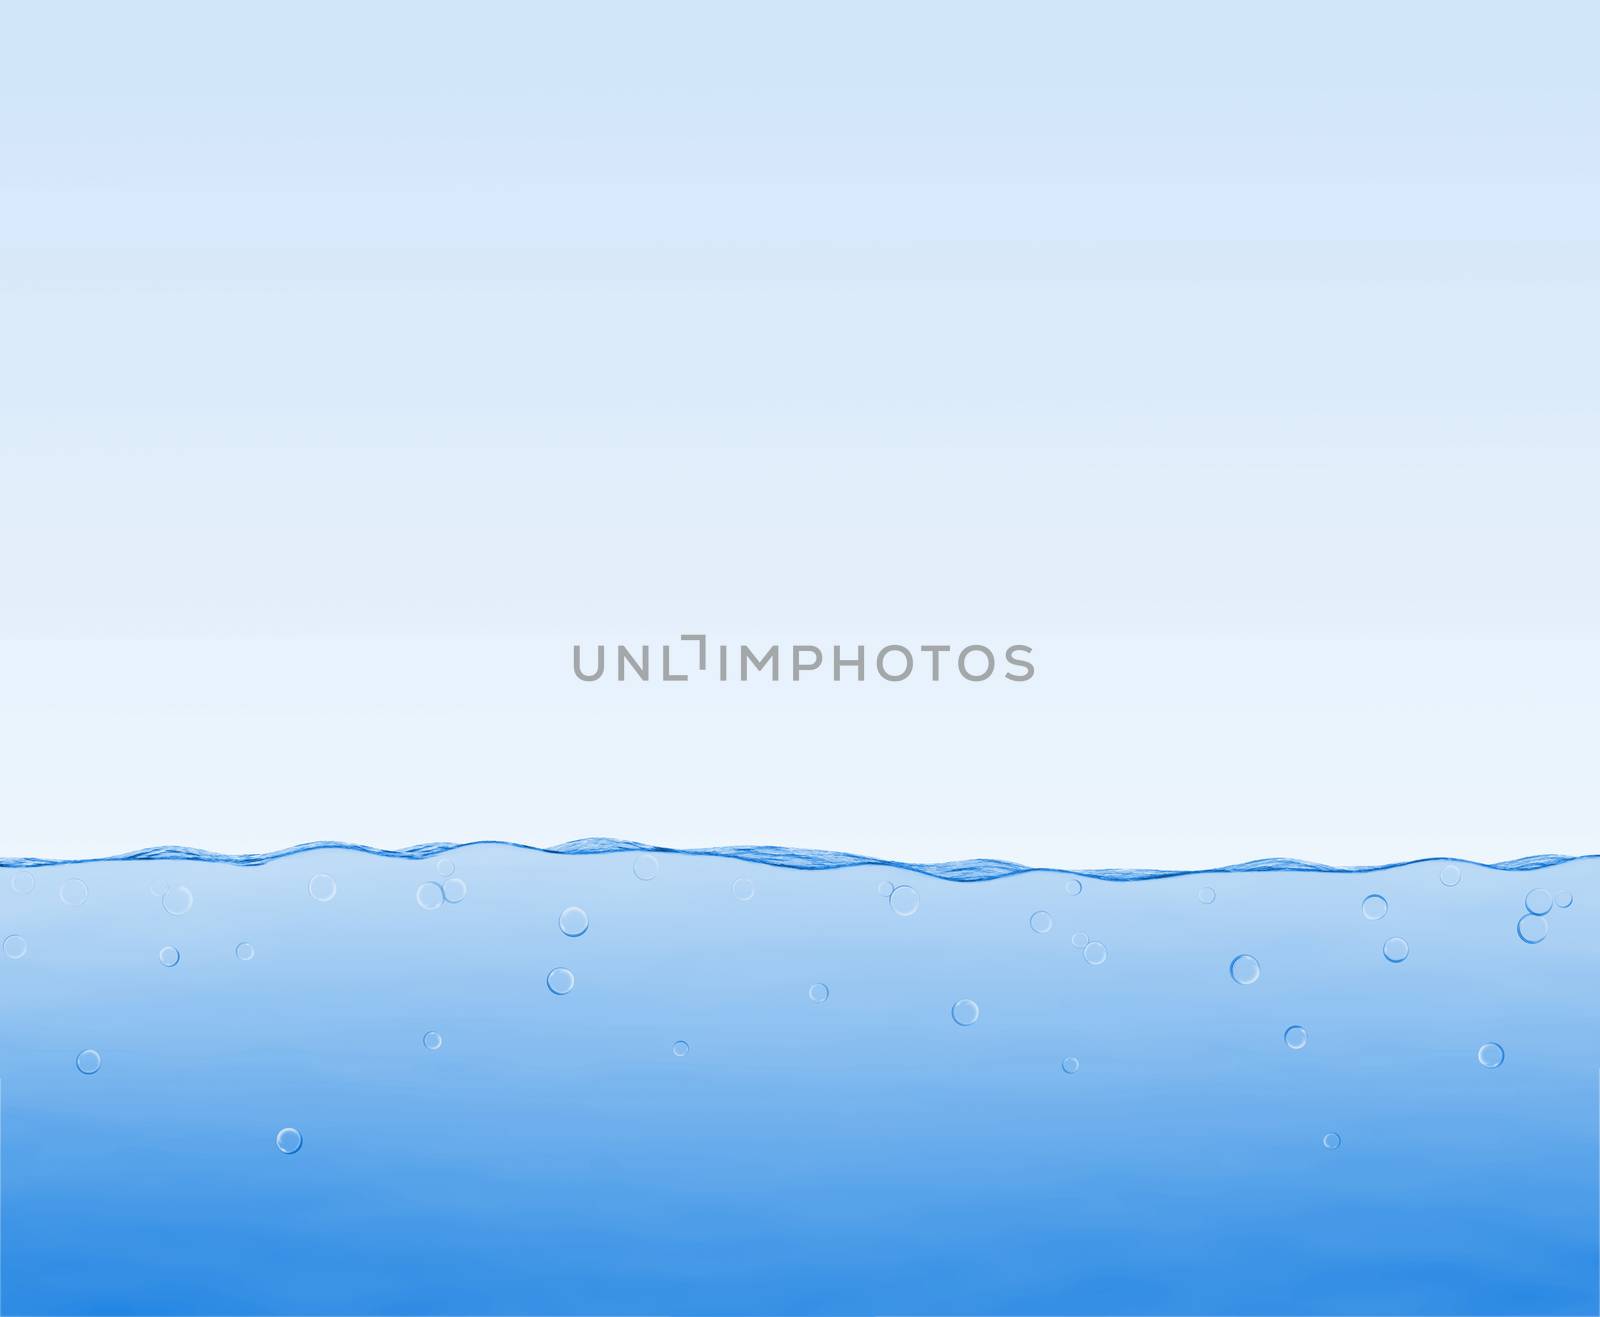 Under water level illustration. by GraffiTimi